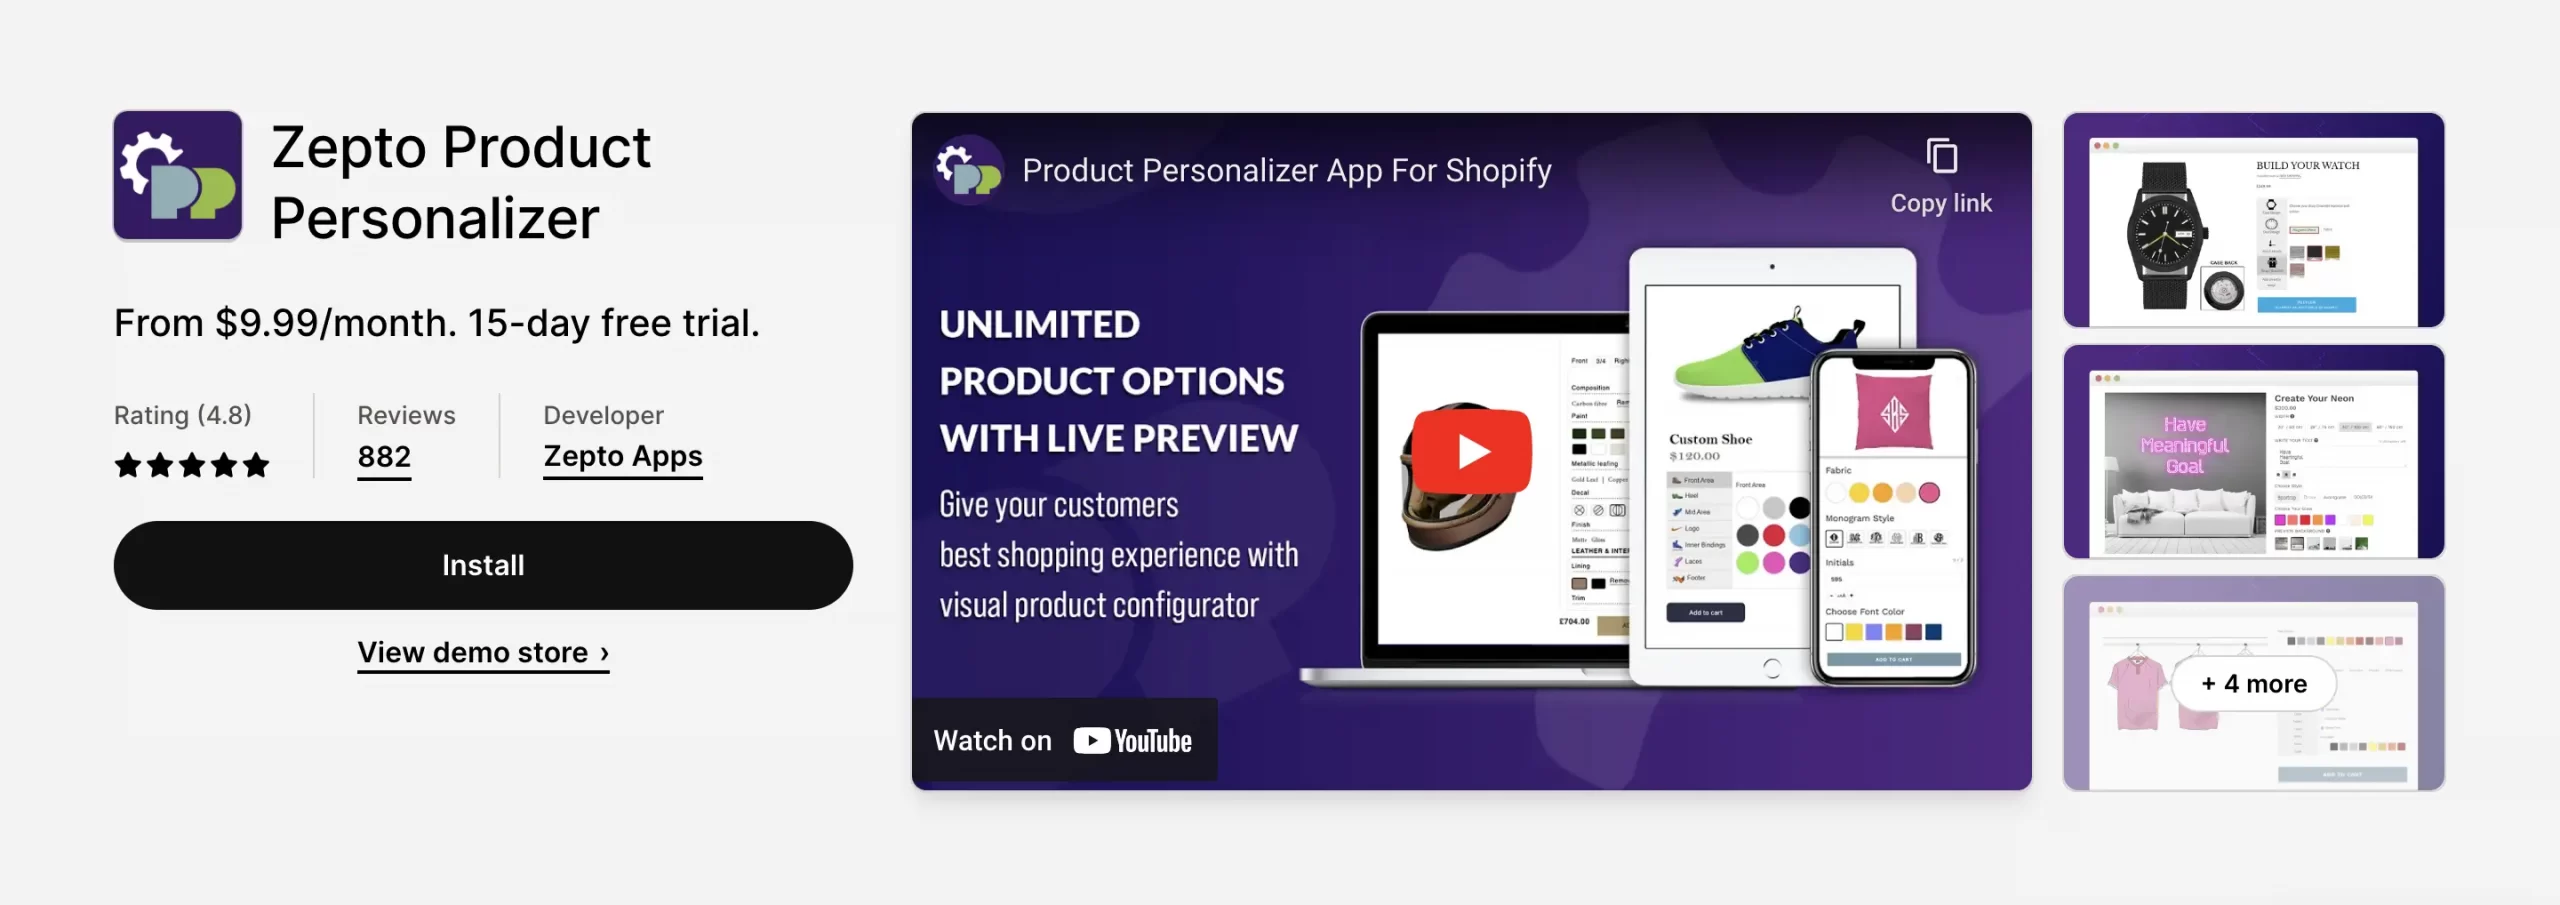 Zepto app offers unlimited product options with live preview.